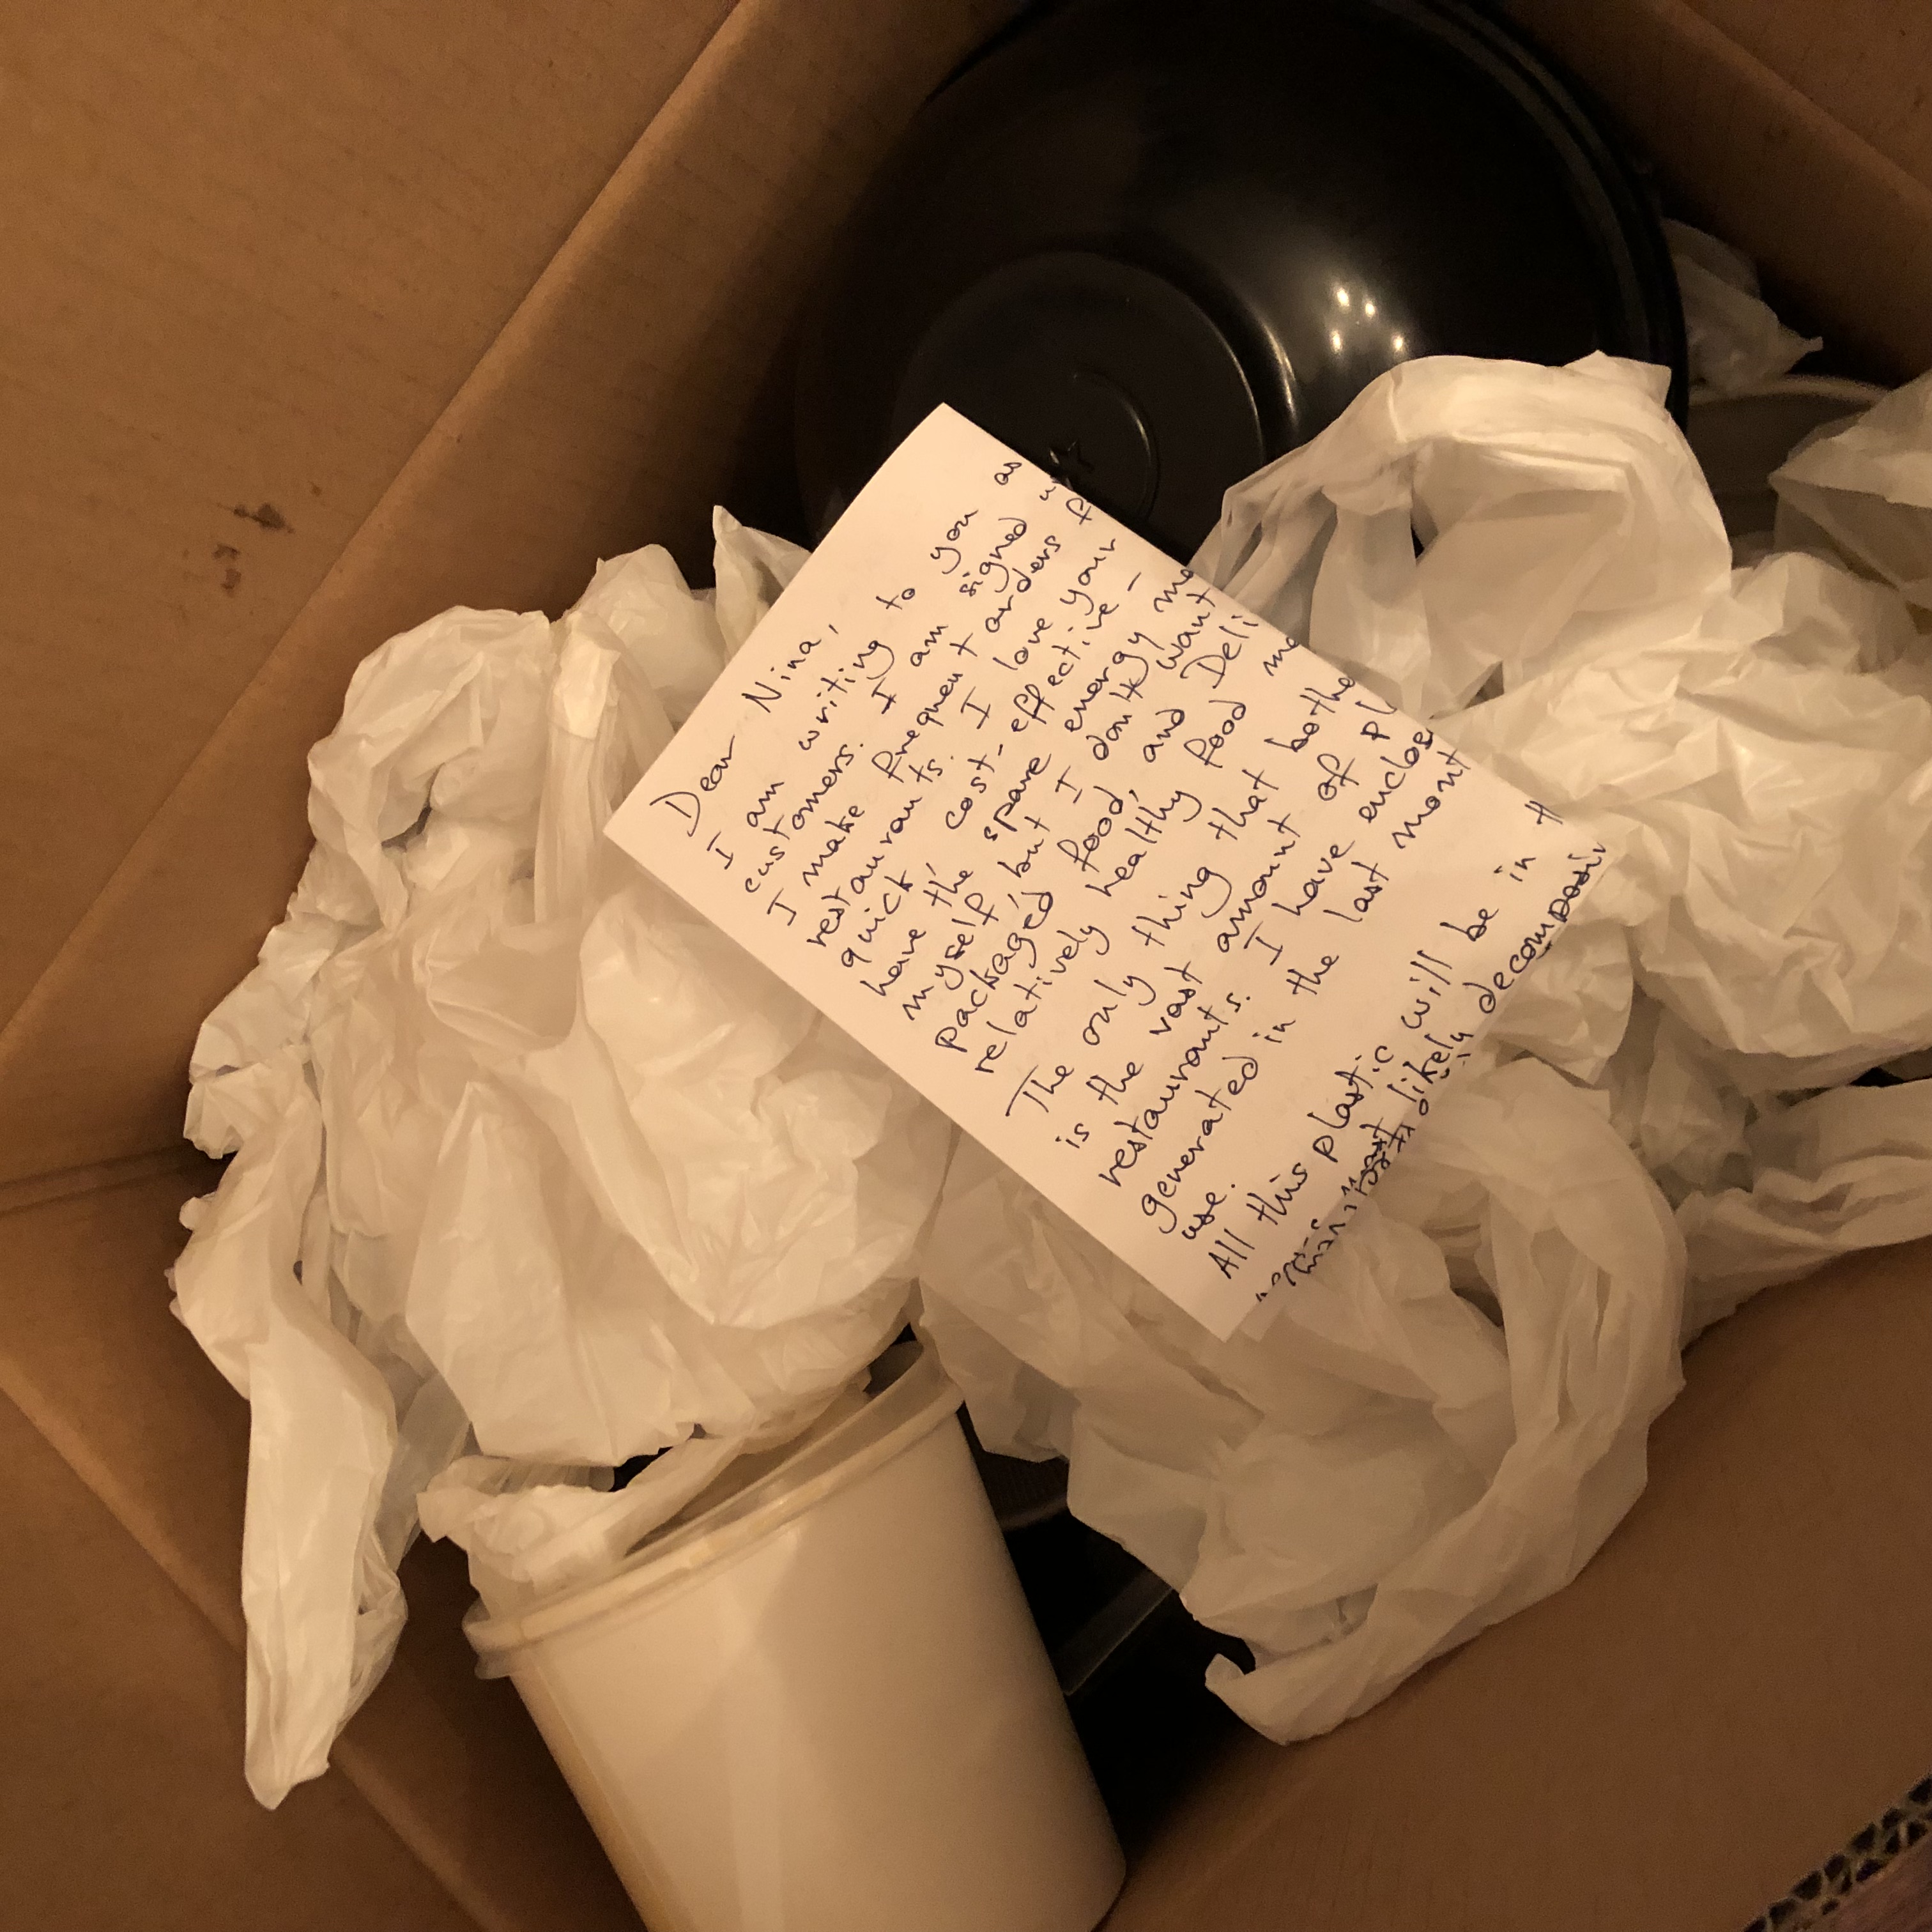 The hand-written letter, folded neatly, on top of the plastics in the box